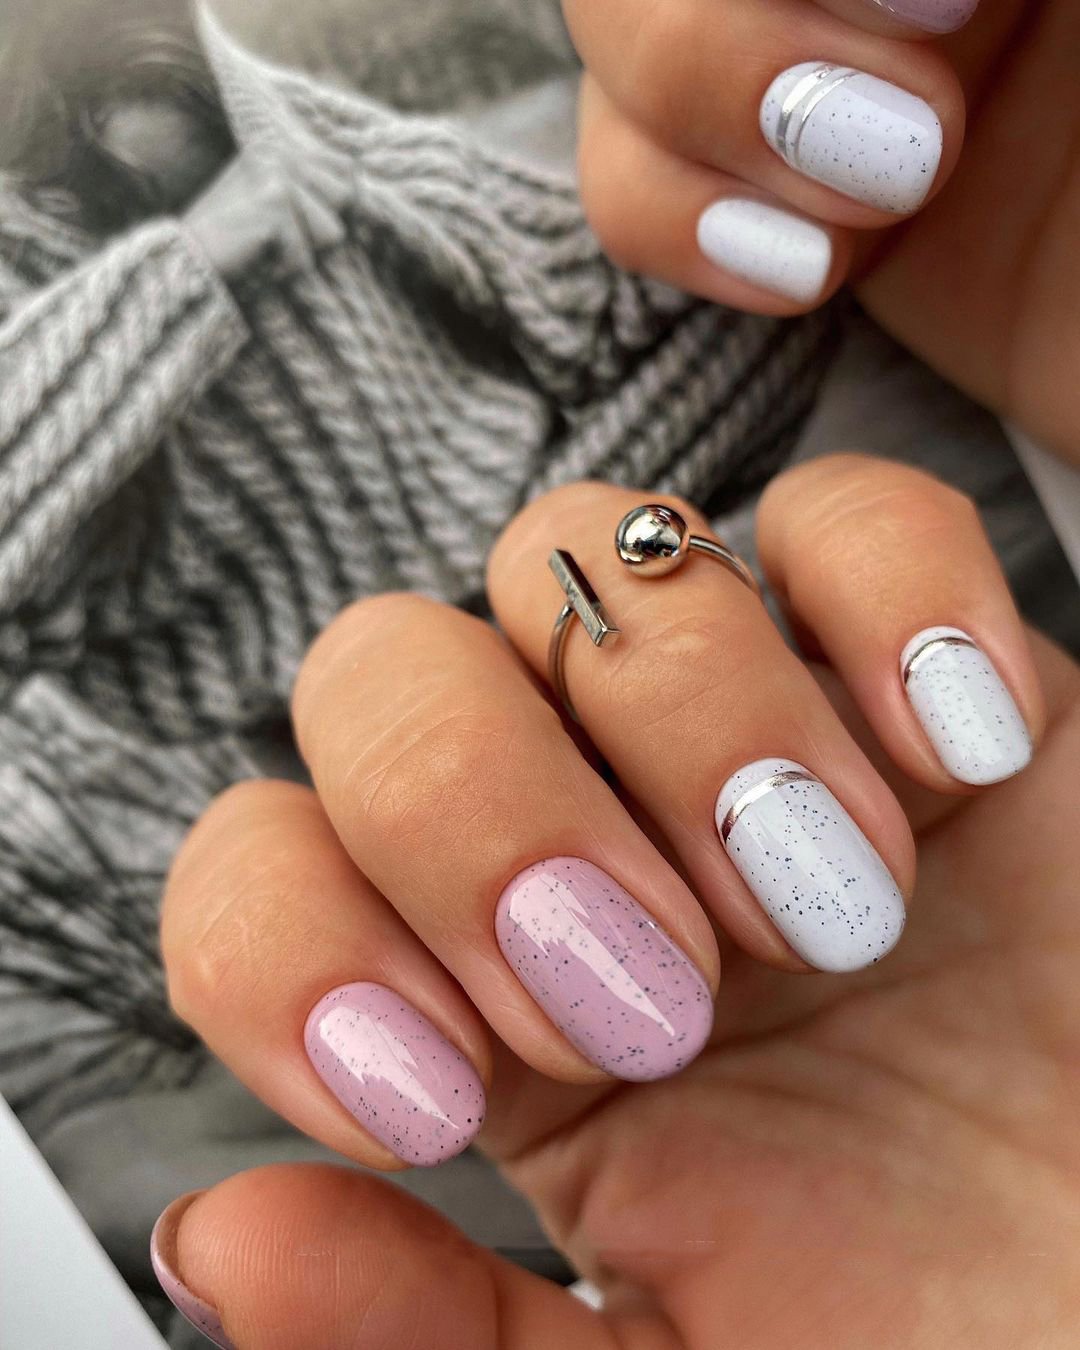 pink and white nails with silver stripes gert_nails